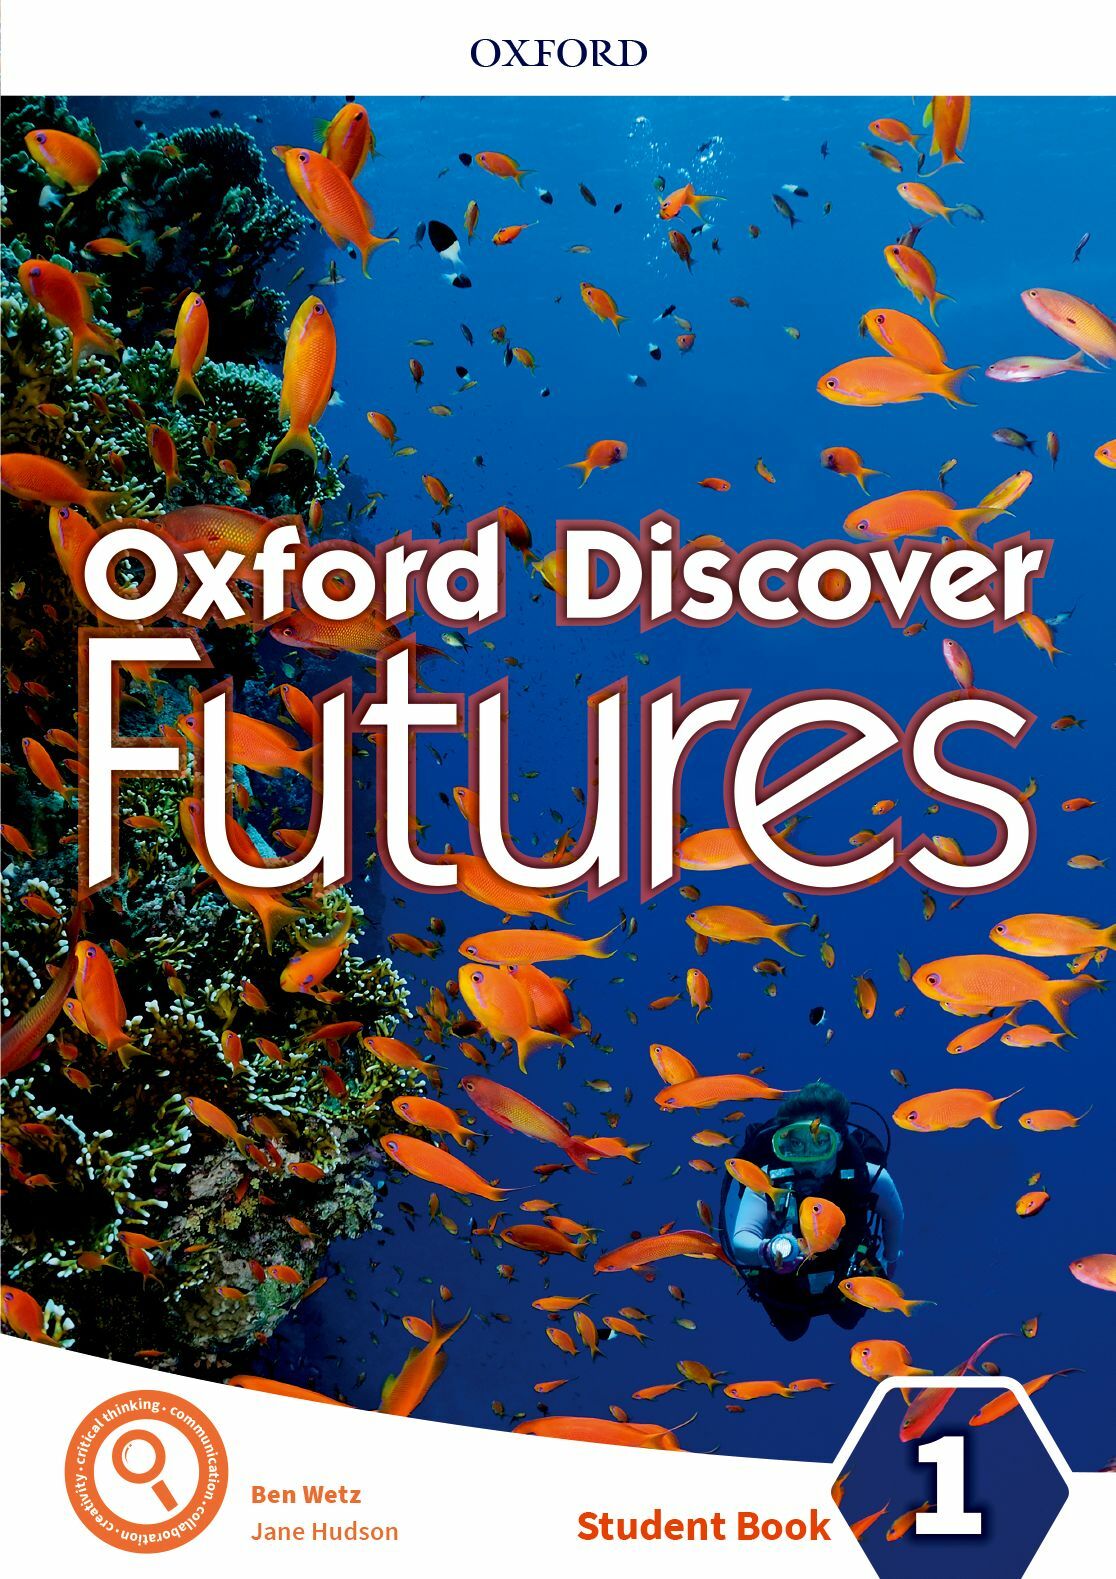 Oxford Discover Futures Level 1: Student Book (Paperback)